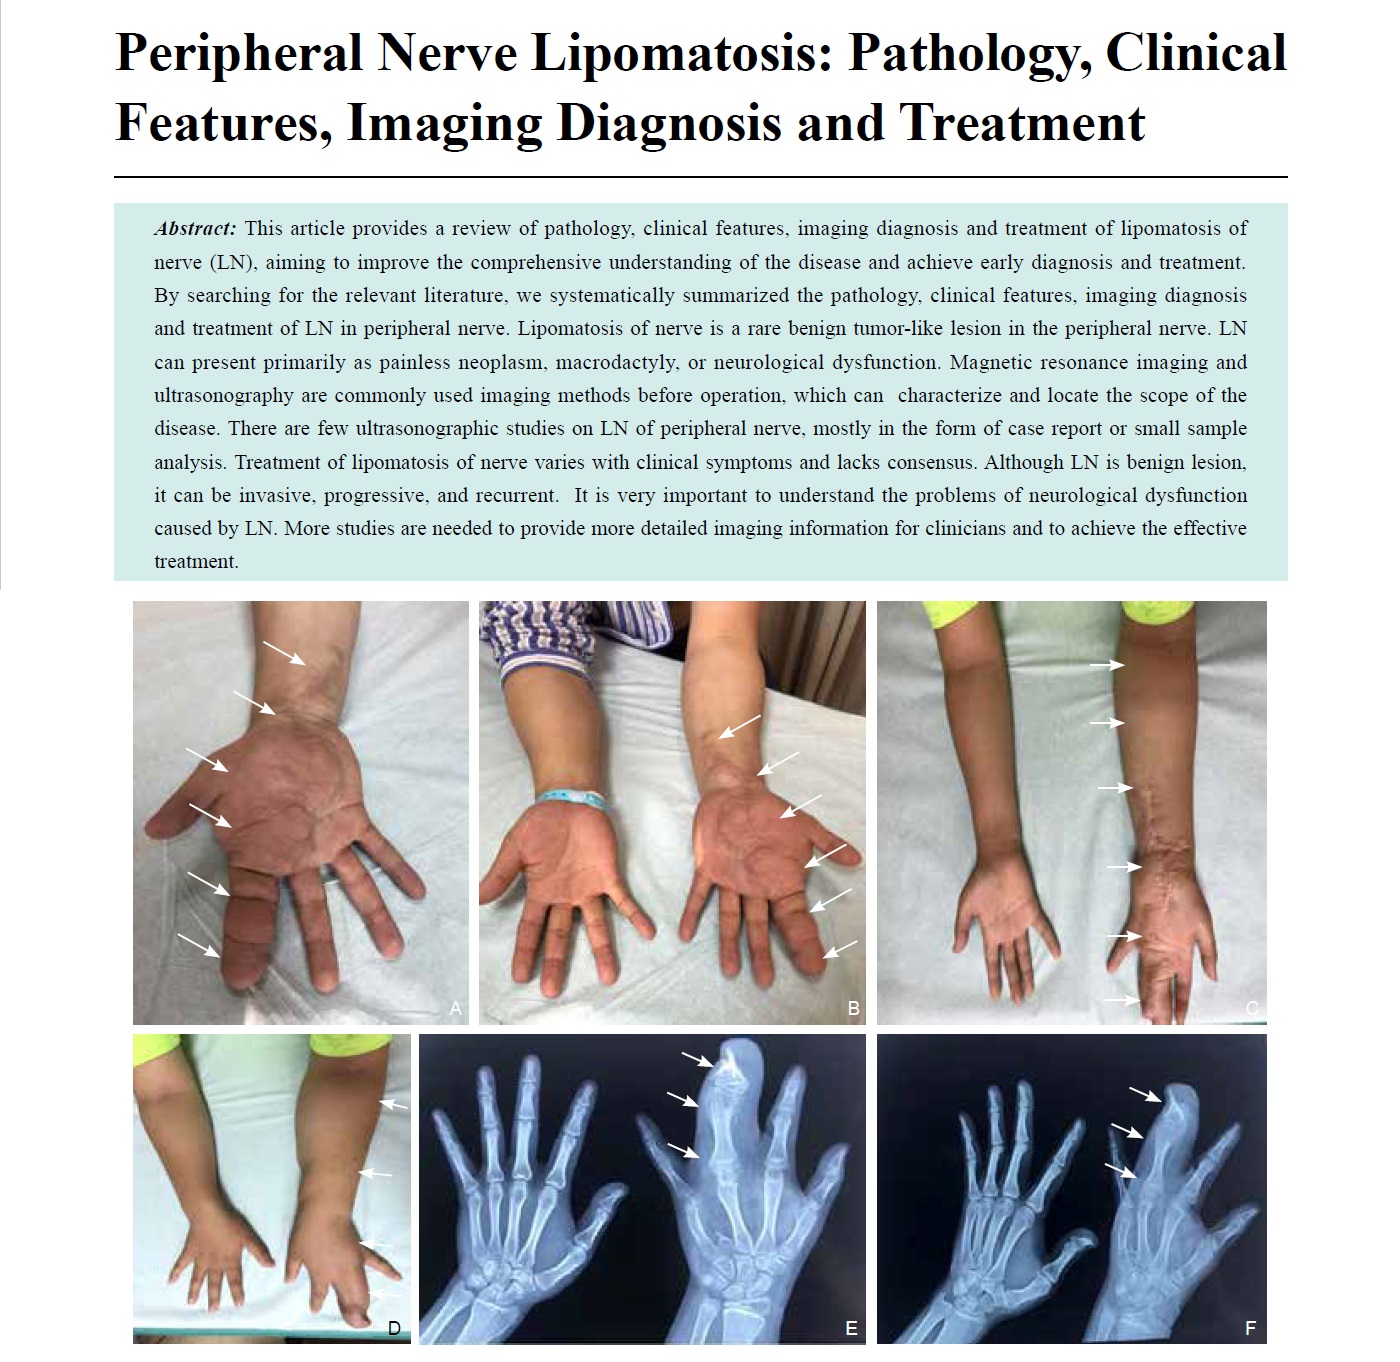 Peripheral Nerve Lipomatosis: Pathology, Clinical Features, Imaging Diagnosis and Treatmen